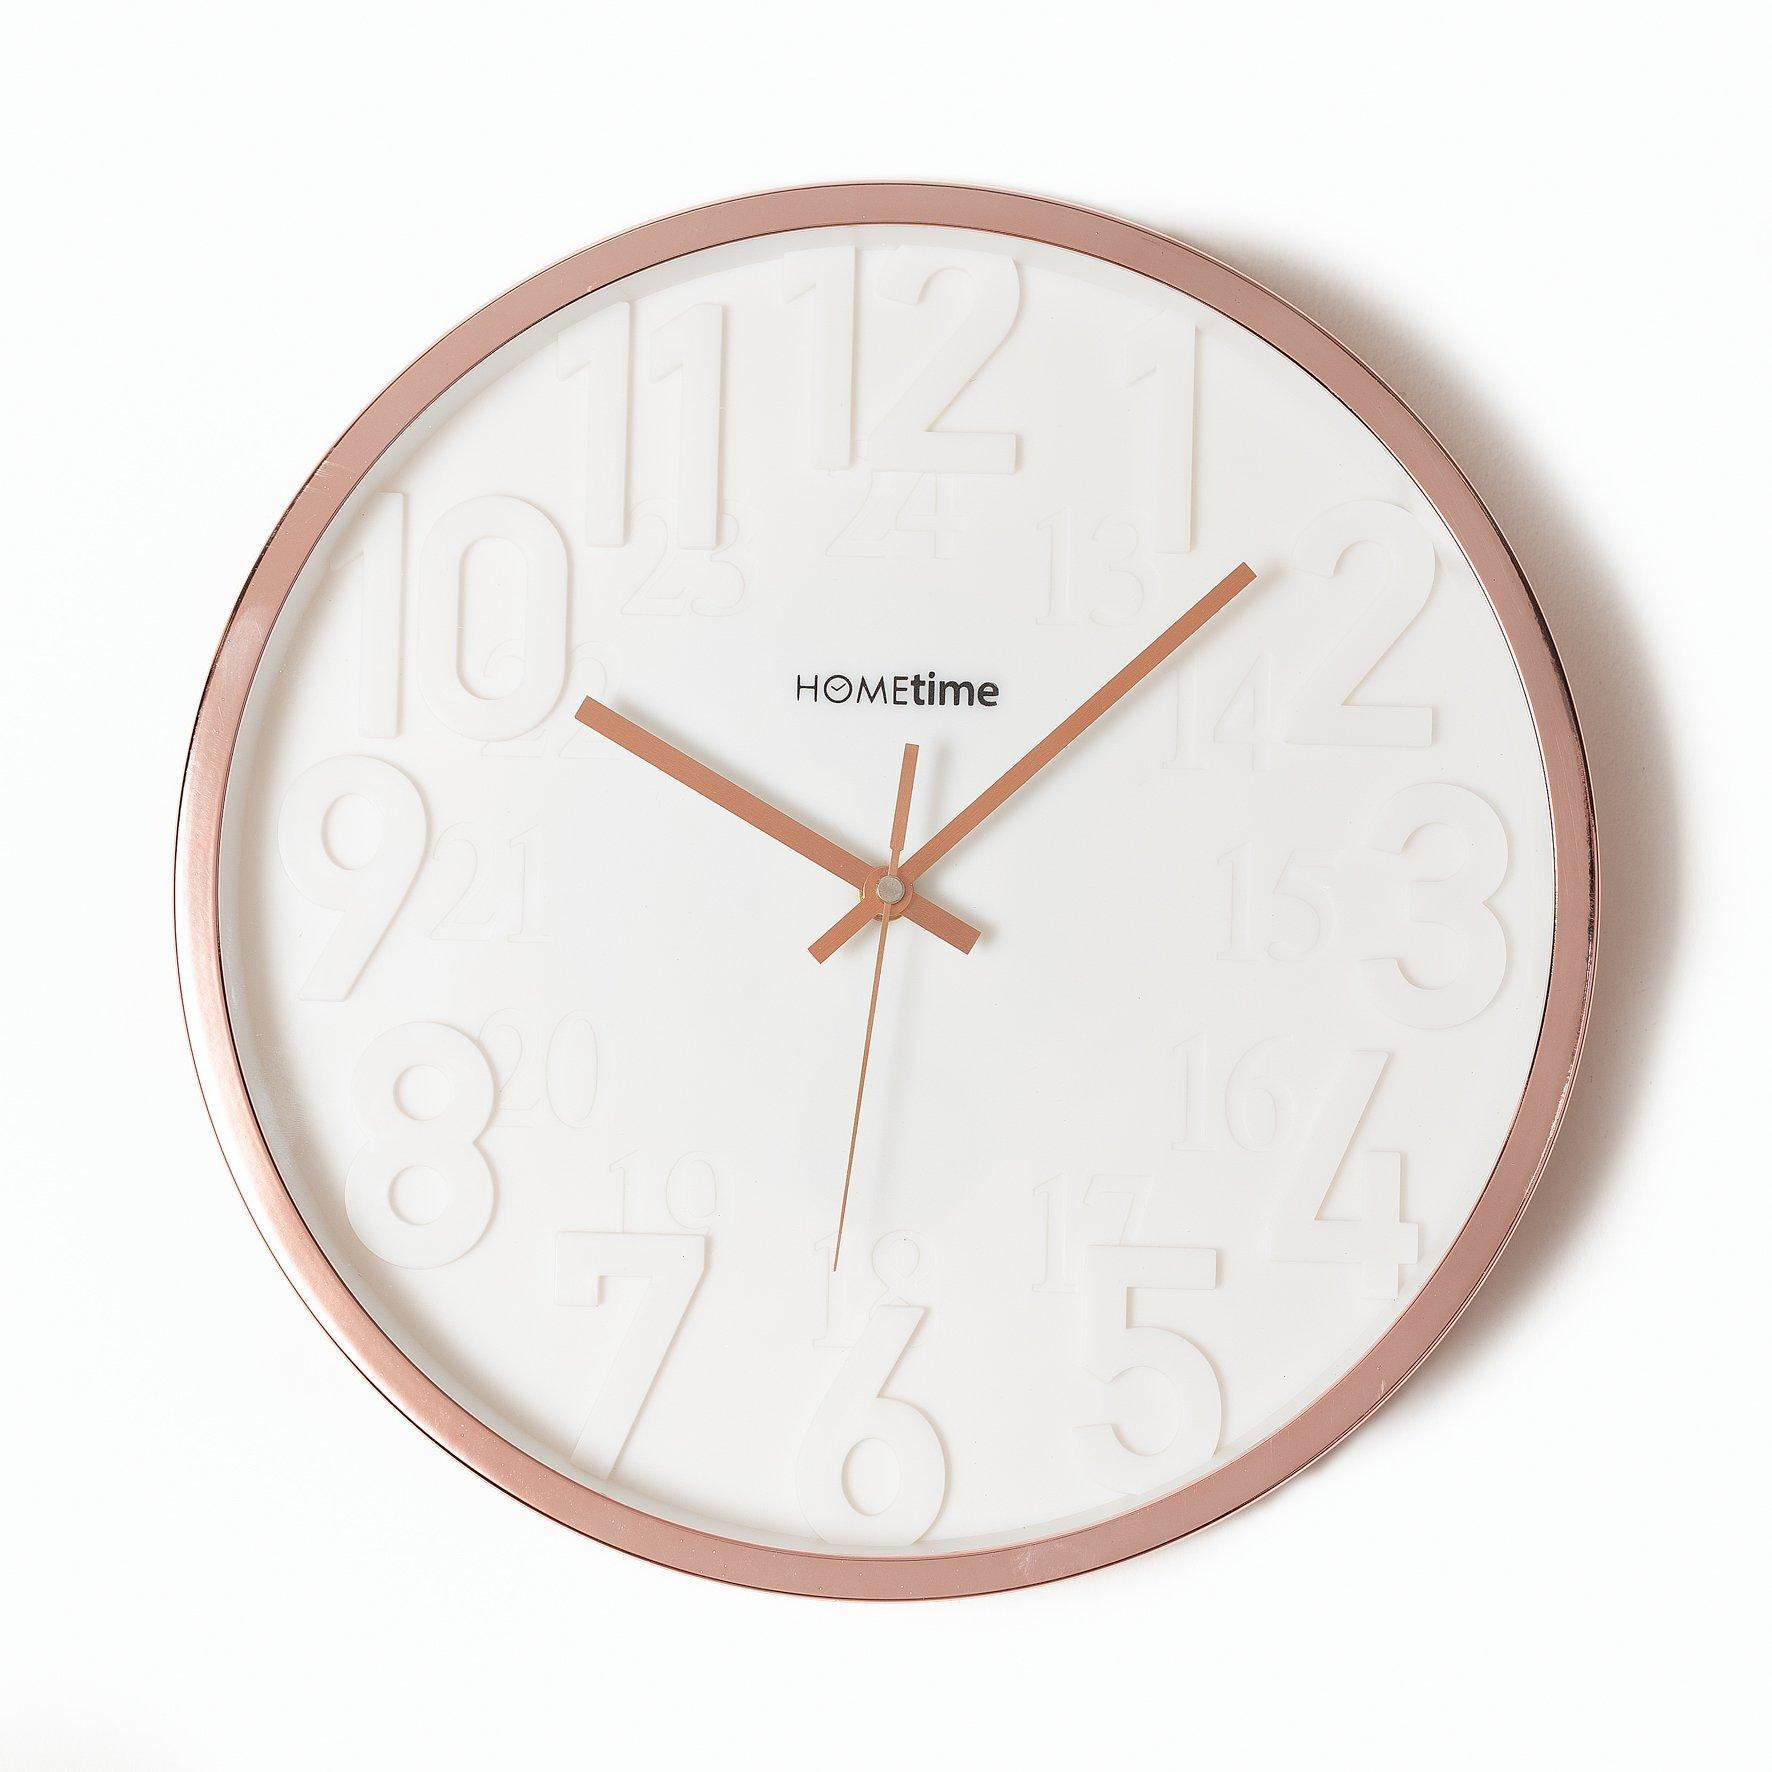 Hometime Round 3D Numbers Wall Clock Rose Gold 35cm - image 1